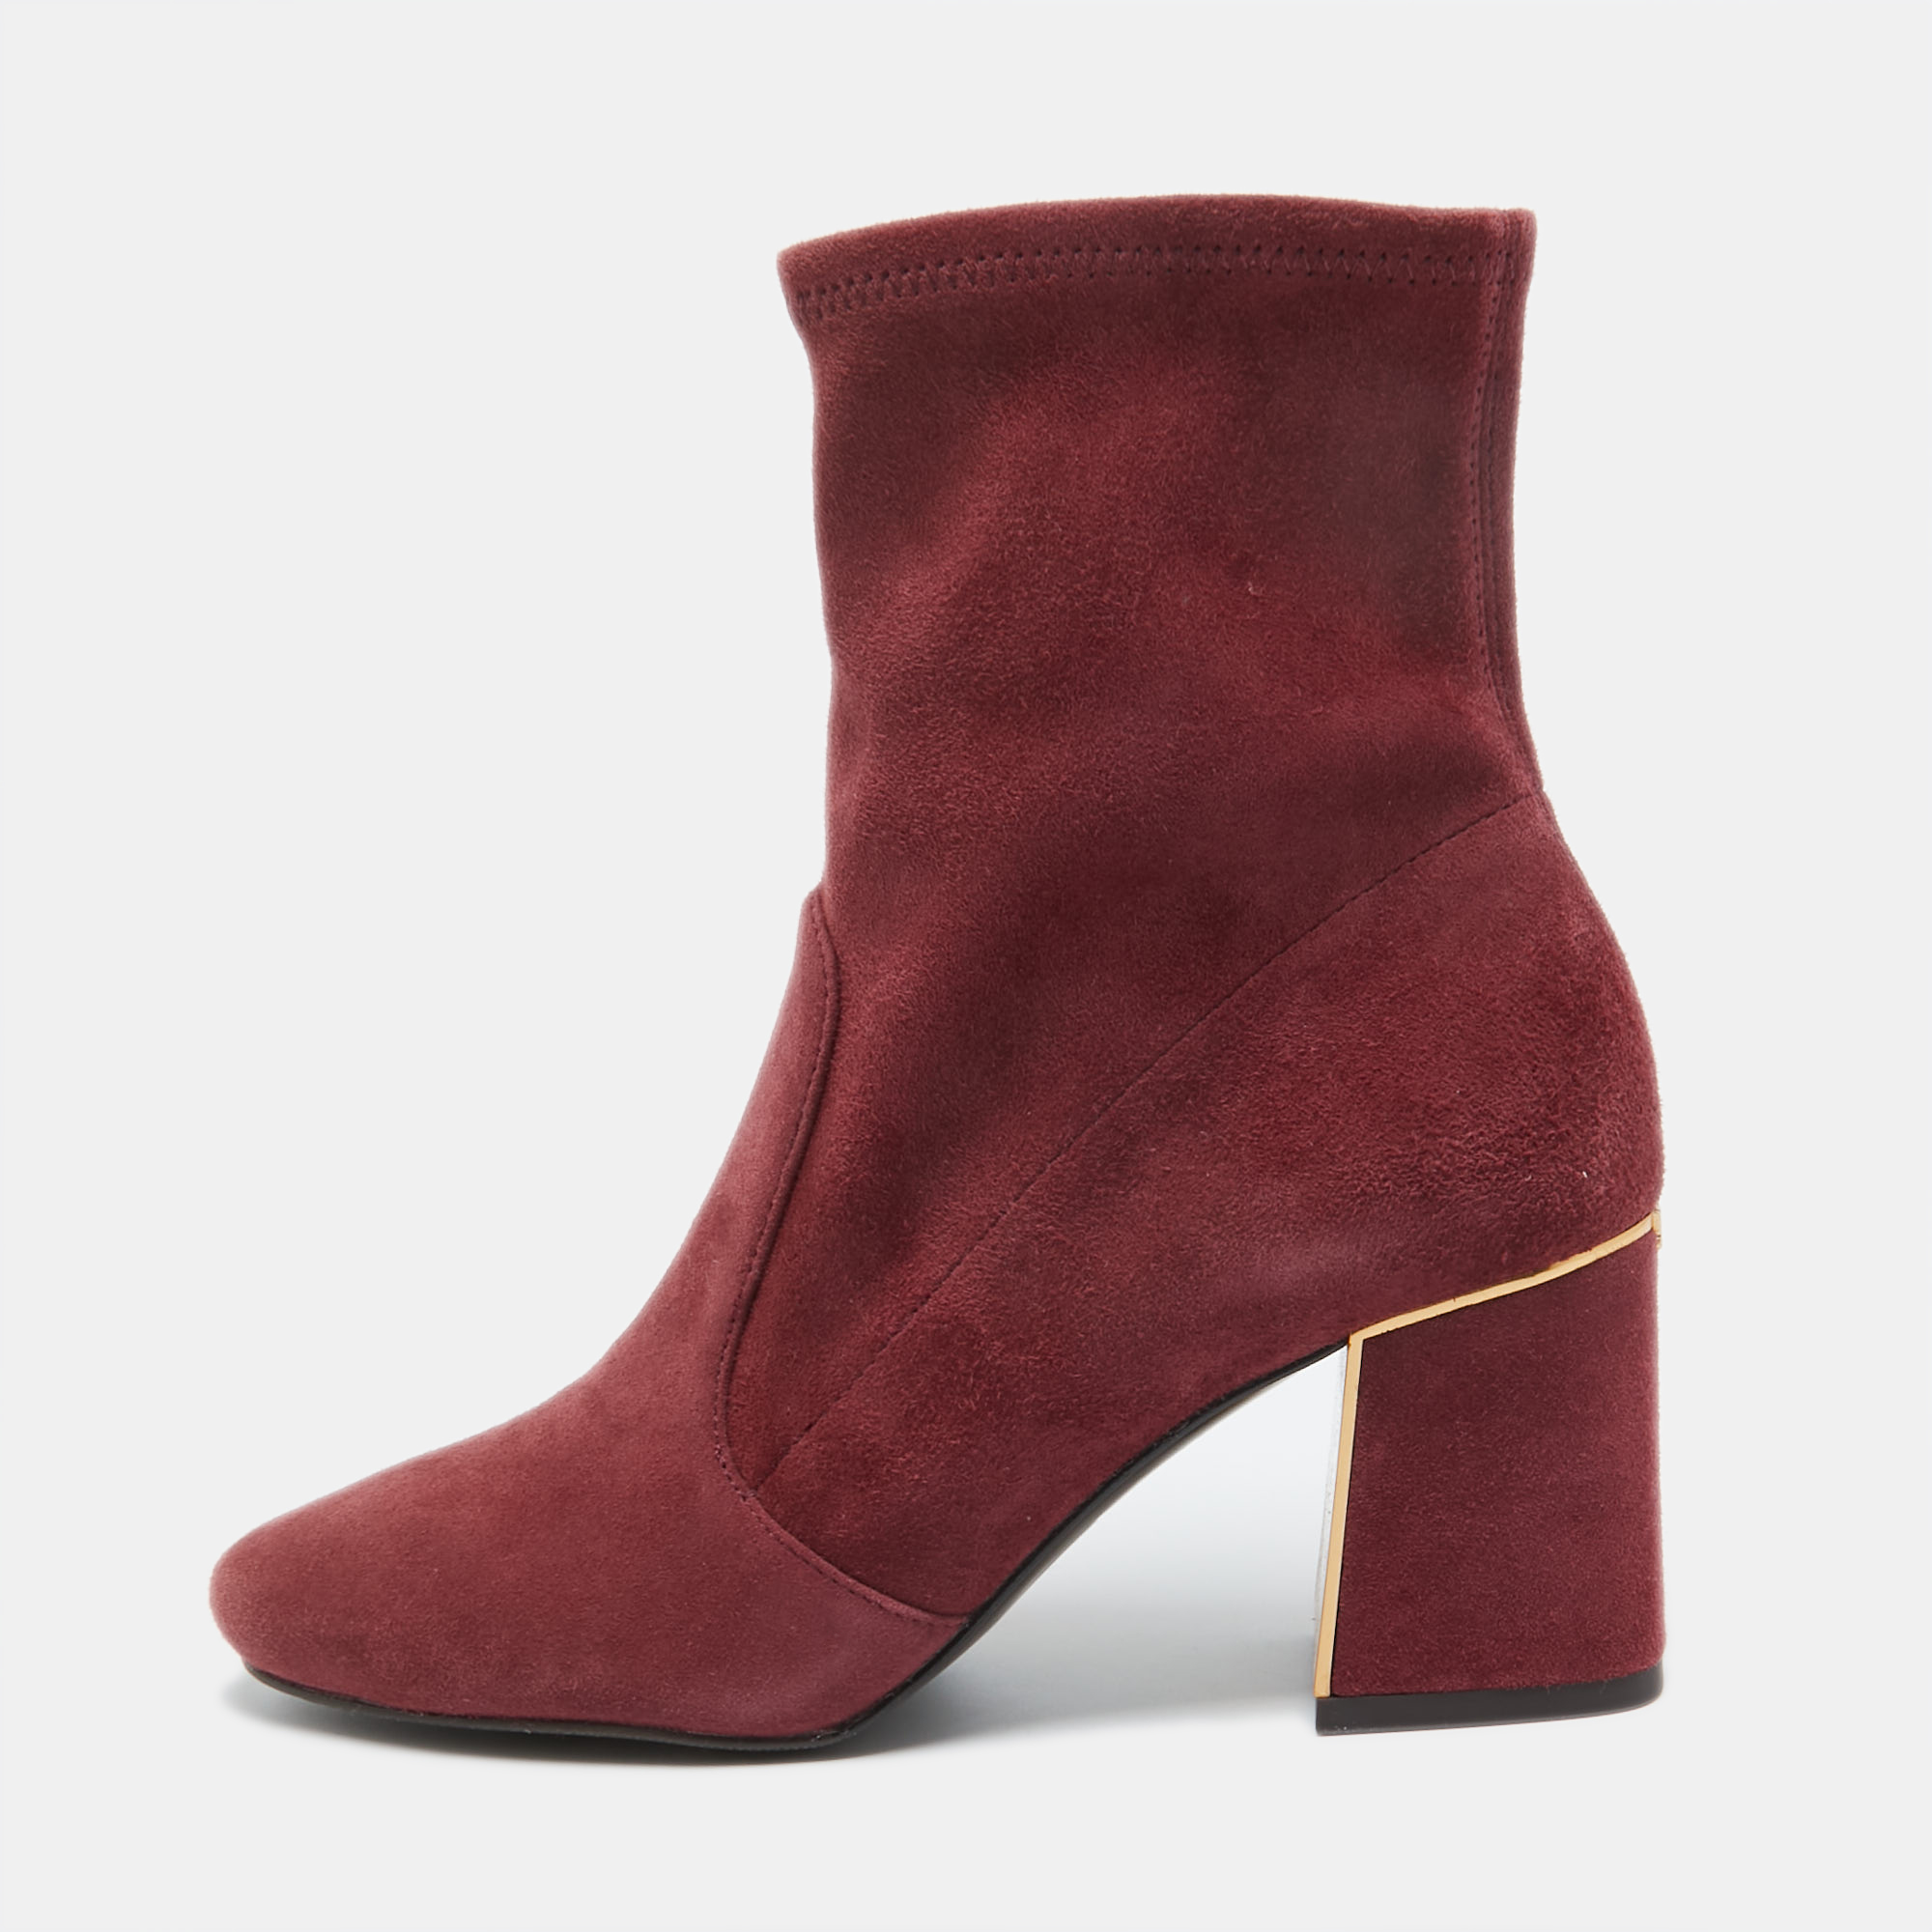 Tory burch burgundy suede zip ankle boots size 36.5